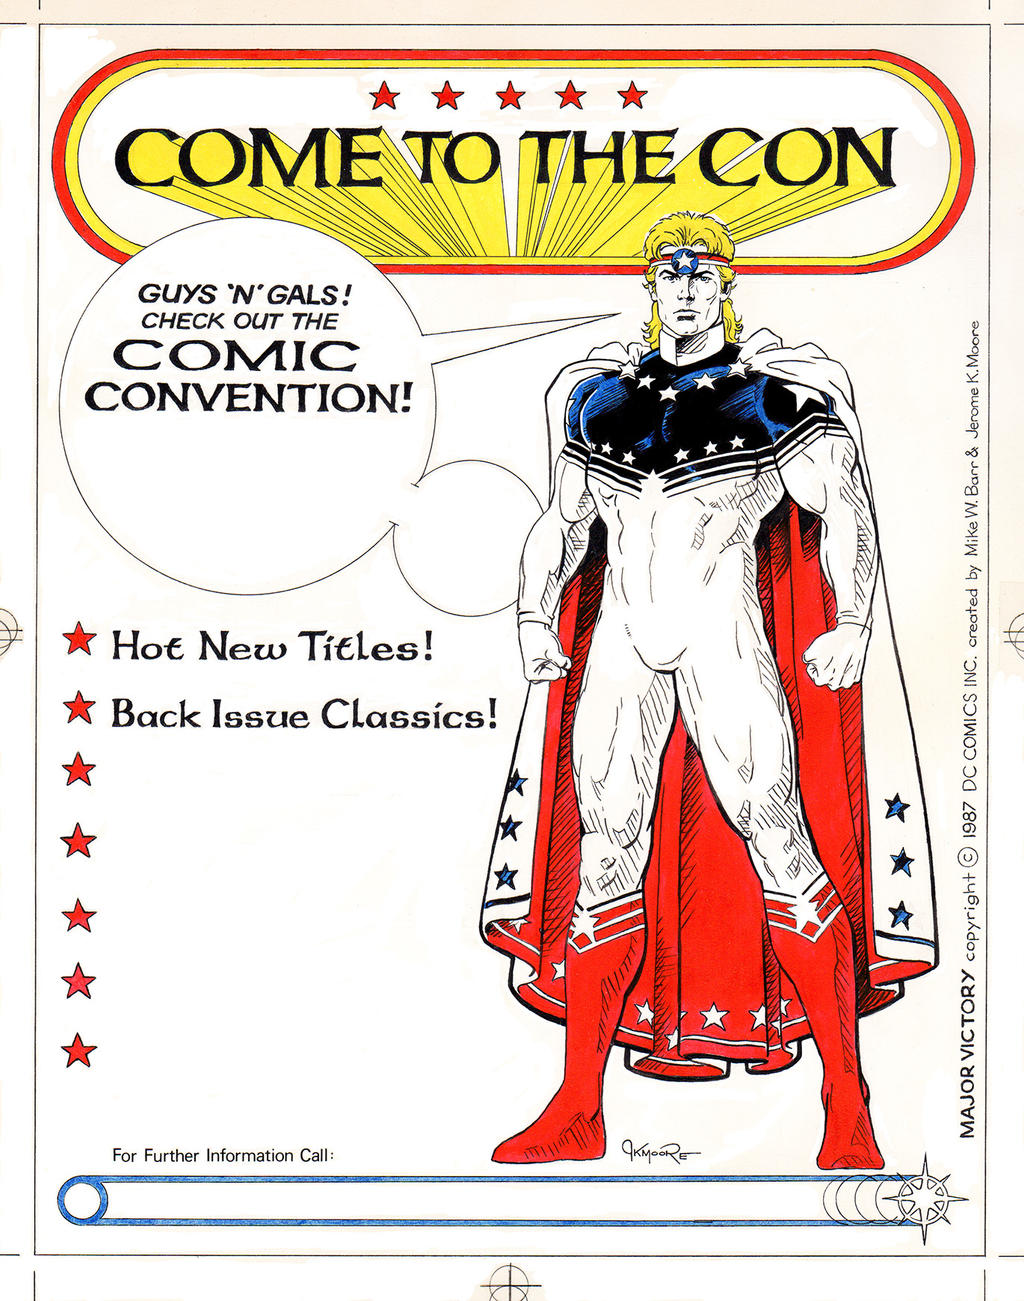 MAJOR VICTORY COMIC CONVENTION AD